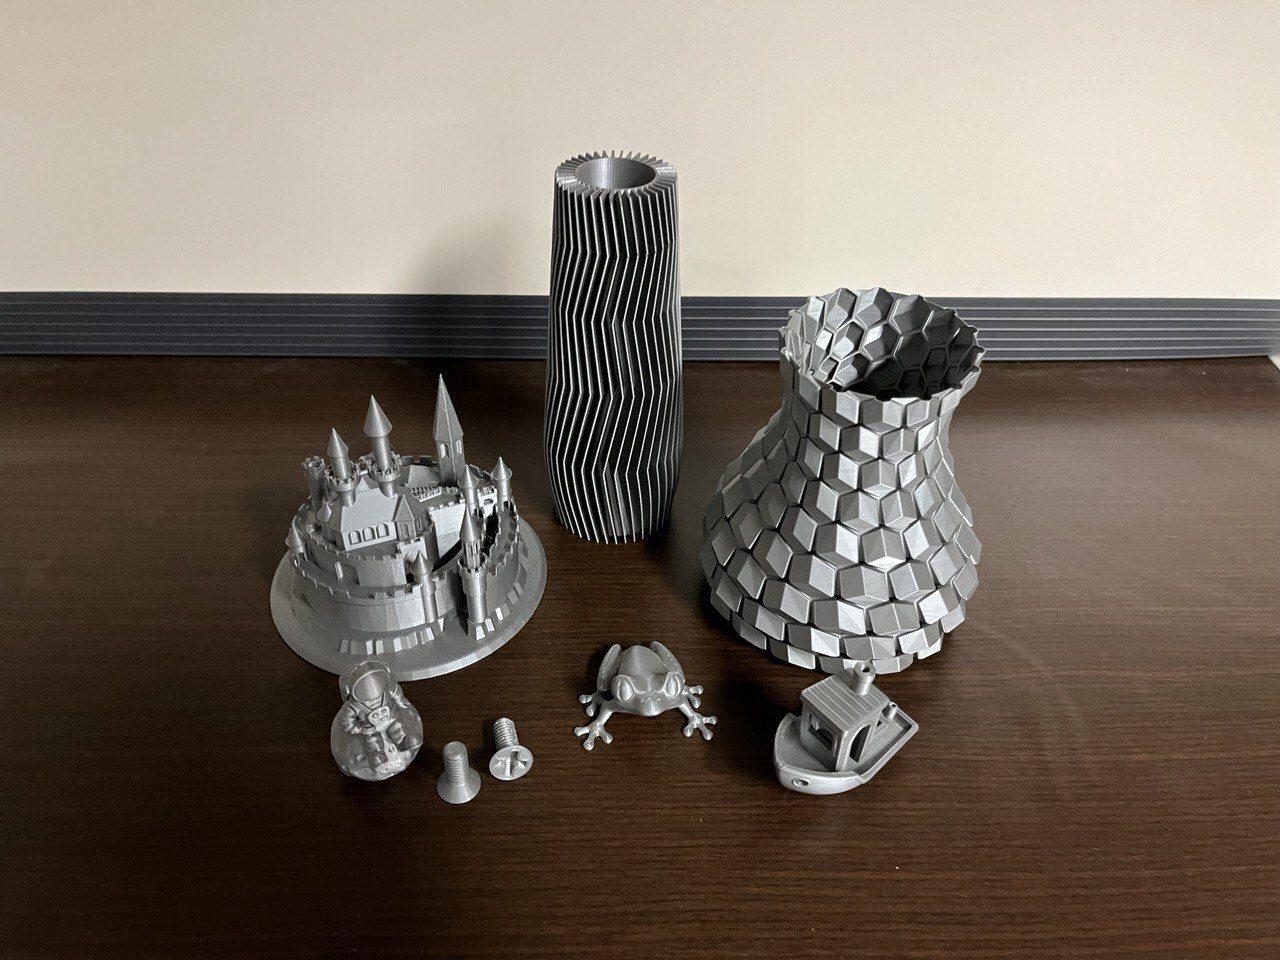 Group of grey 3D printed objects.